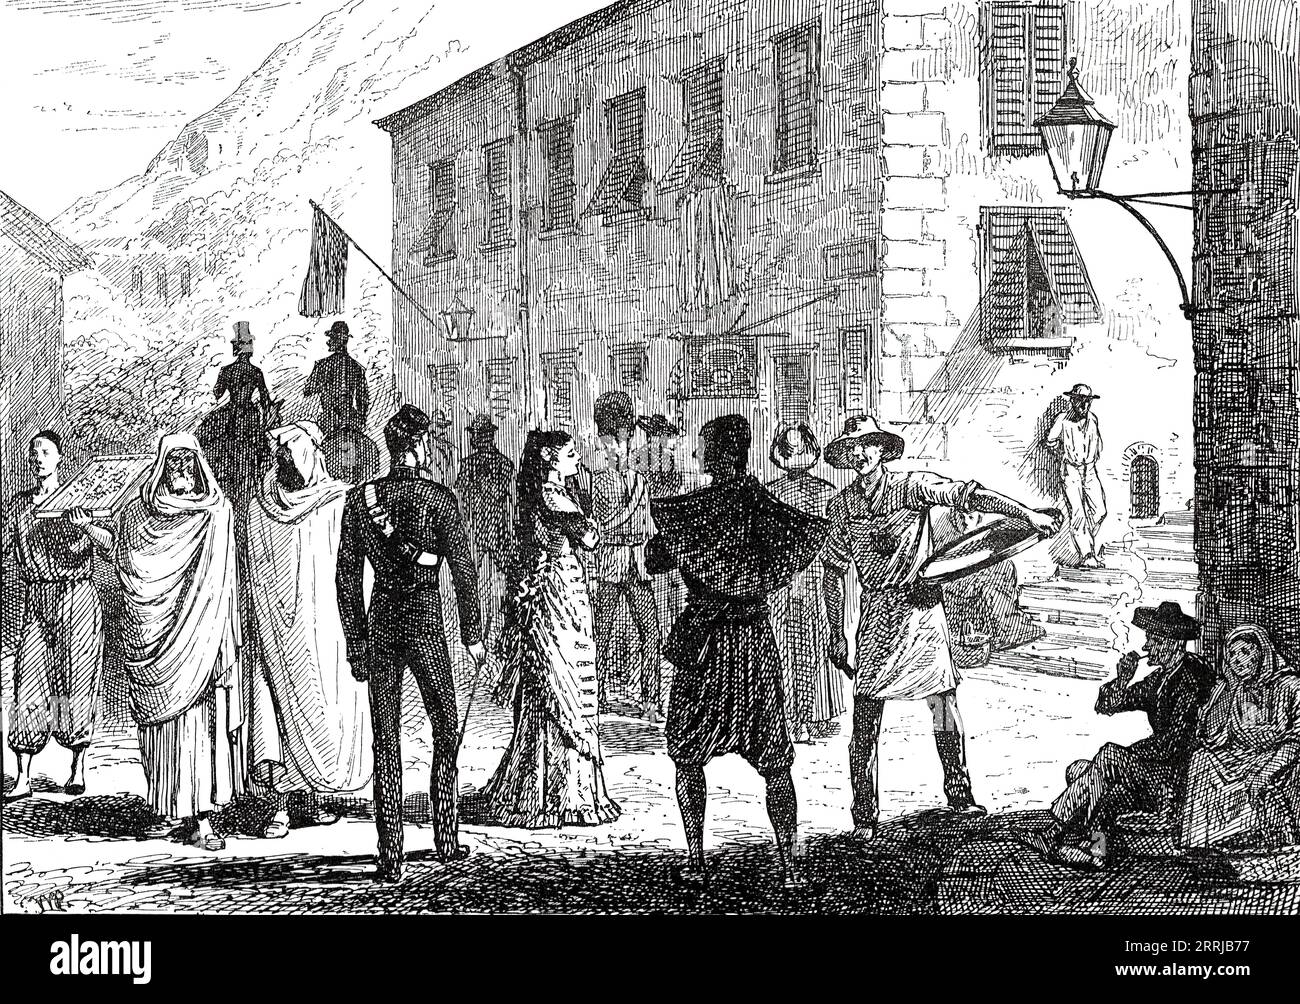 Street scene at Gibraltar, 1876. Engraving from a sketch by '...a valued correspondent and amateur artist, Major W. O. Carlile, R.A...The drapery figures of Spanish women, and of Jews and Jewesses, may be here compared with those of the Moorish people. Gibraltar has many such picturesque contrasts and oddities of juxtaposition at the very gate of the Mediterranean, between our British seafaring or soldiering visitors and the nations of Southern Europe or Northern Africa'. From &quot;Illustrated London News&quot;, 1876. Stock Photo